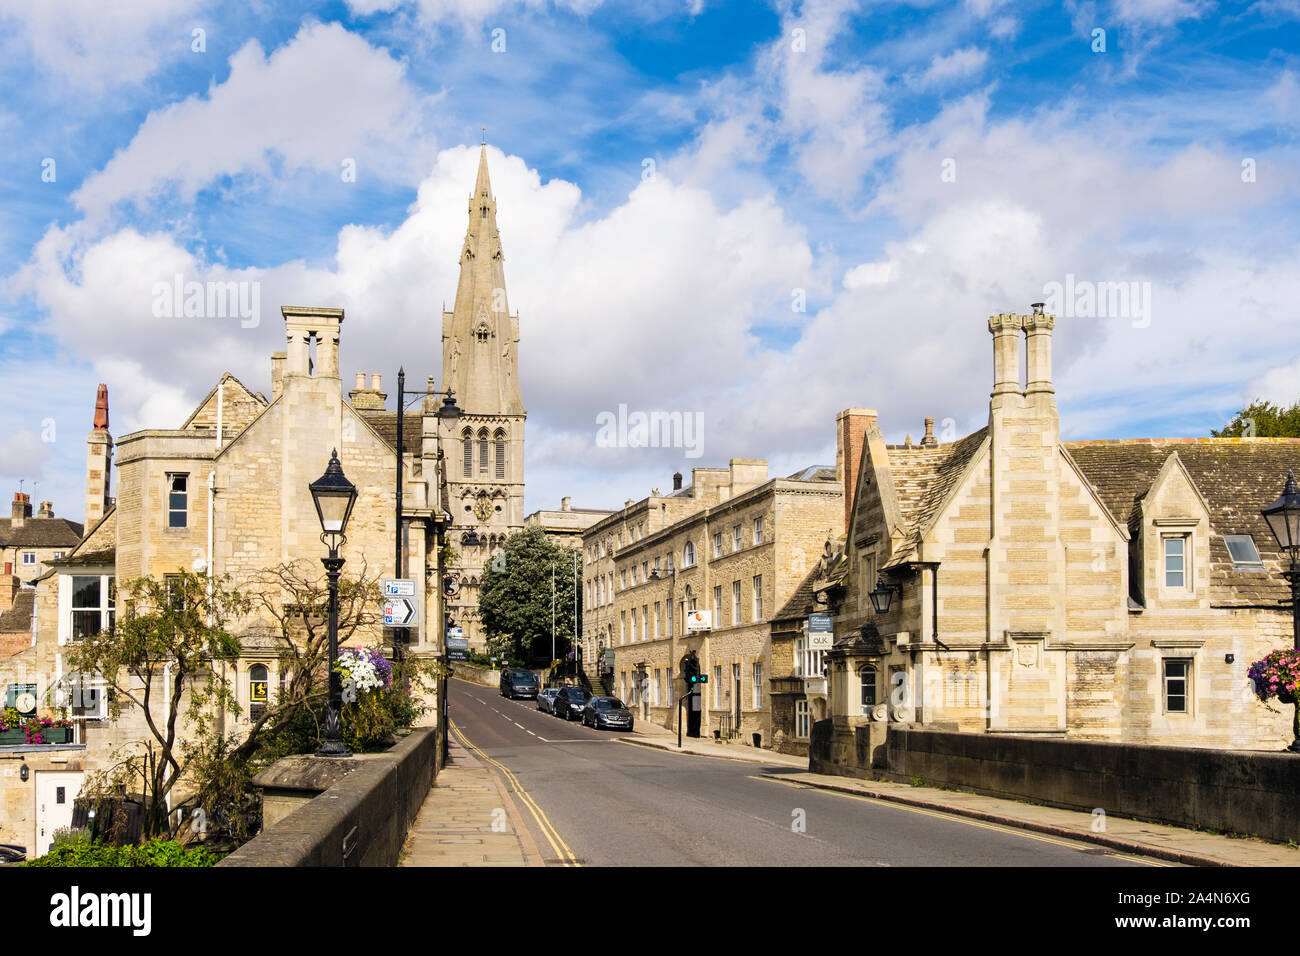 View along a street lined with old limestone buildings to St Mary's church from bridge over River Welland. Stamford, Lincolnshire, England, UK Stock Photo